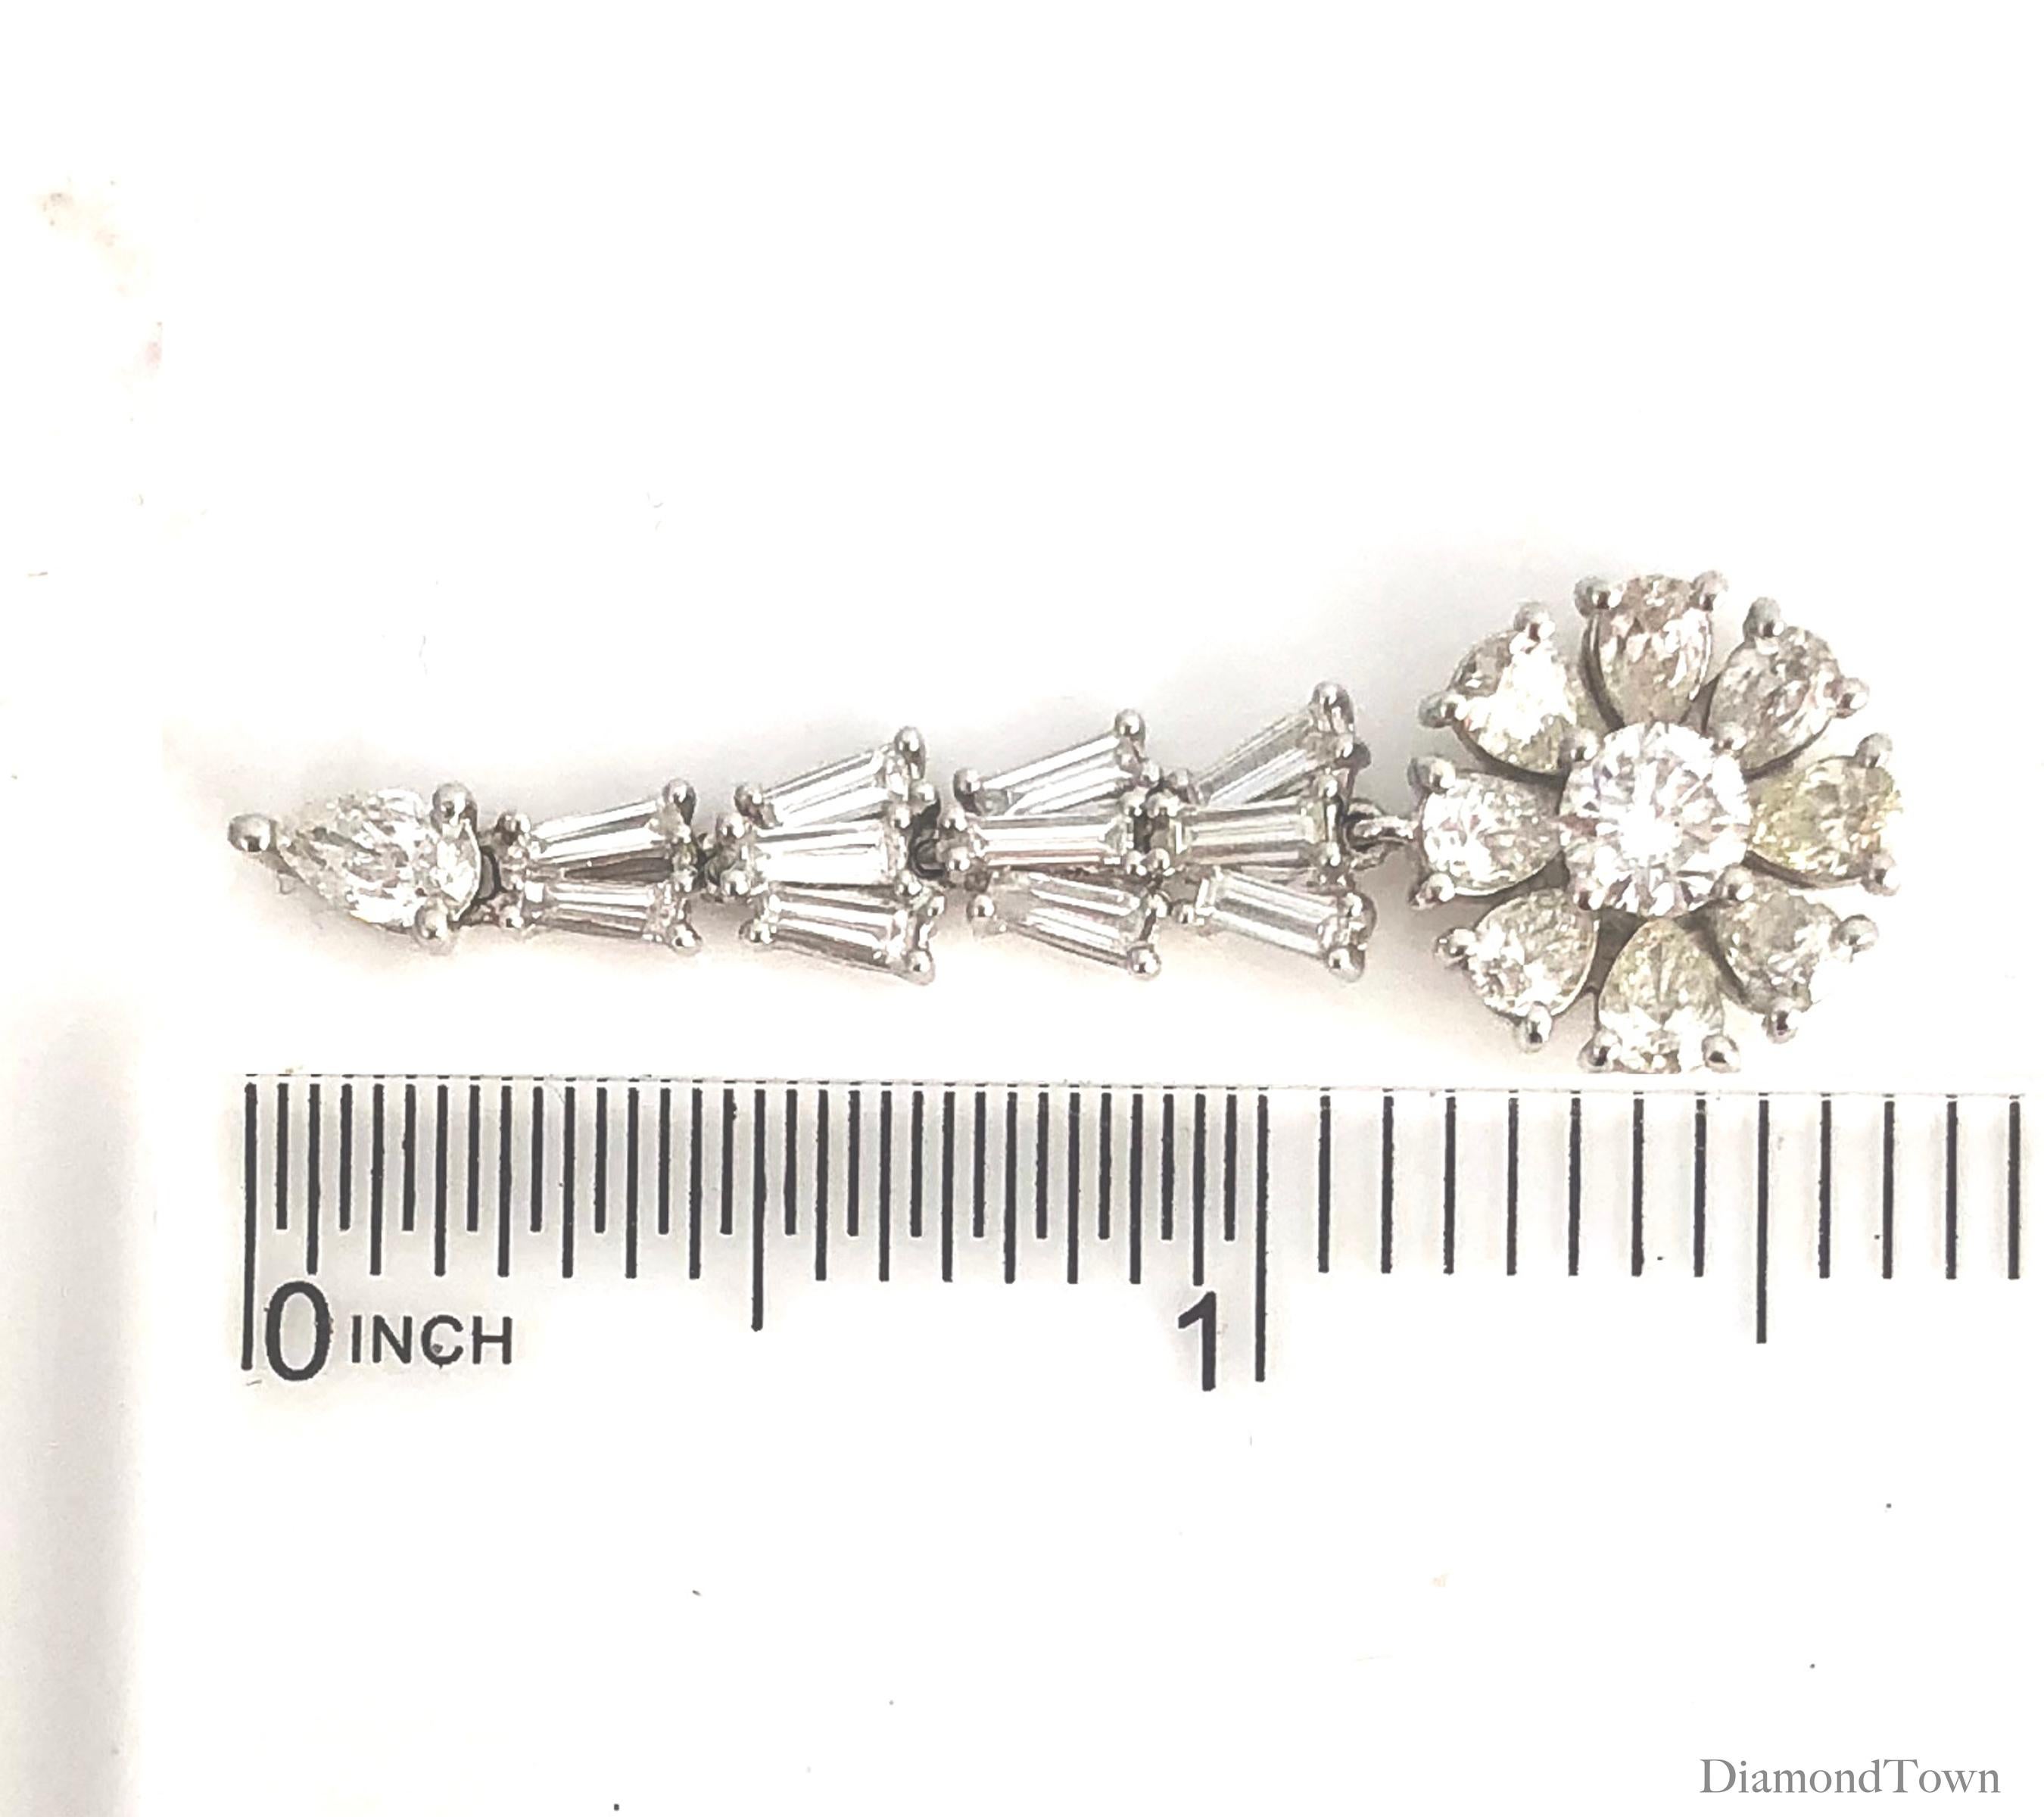 4.98 Carat Mixed Cut Diamond Dangle Stud Flower Earrings in 18W Gold ref503 In New Condition For Sale In New York, NY